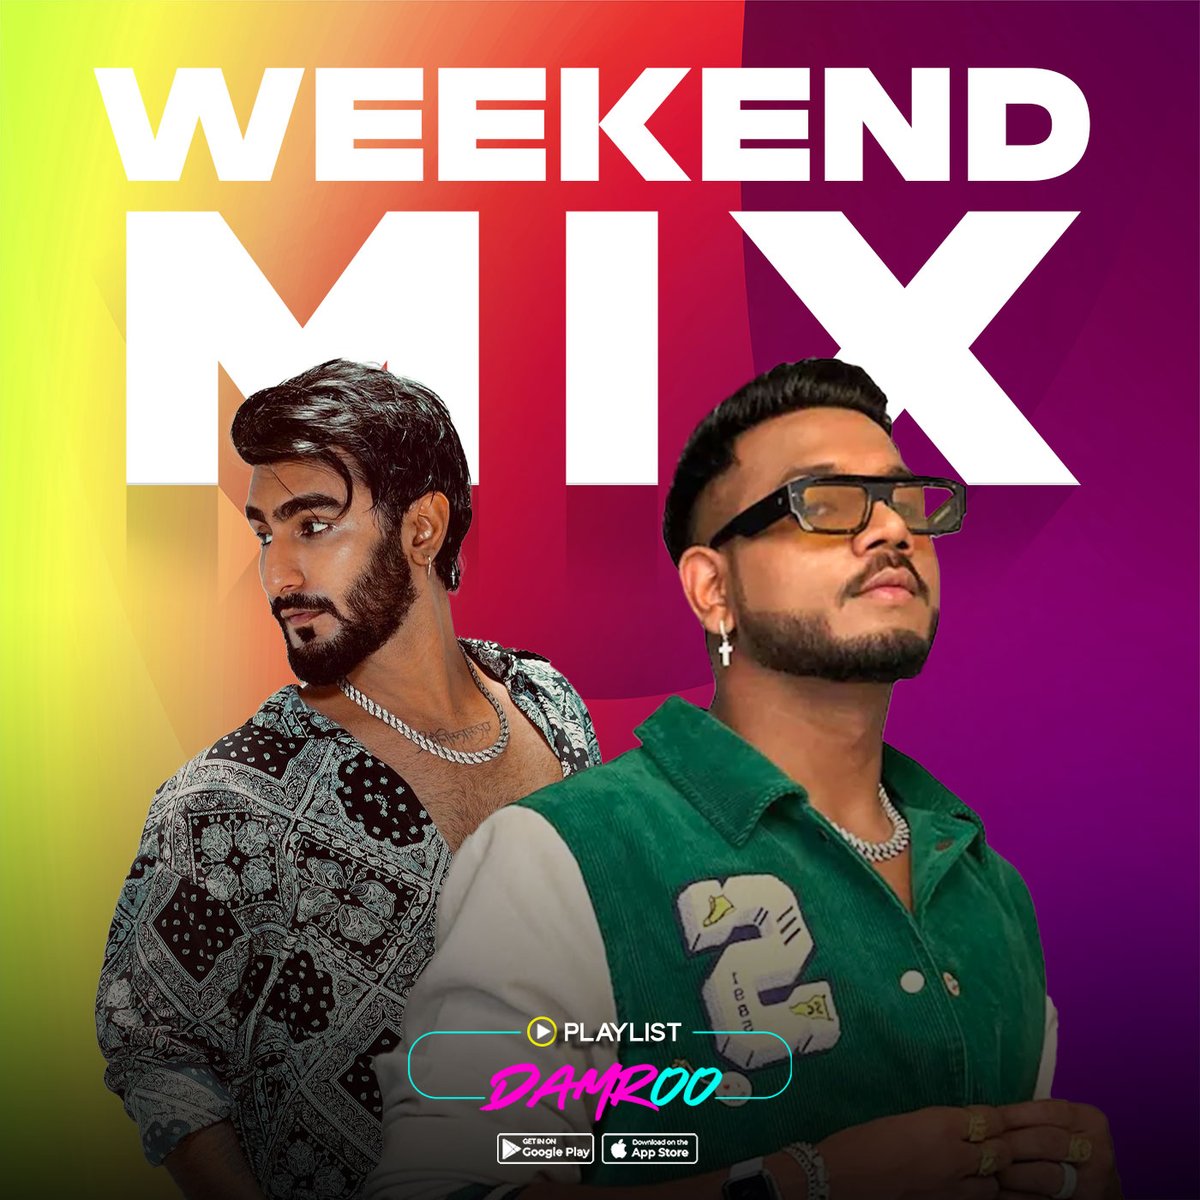 Groove into the Weekend: Your Ultimate Mix Playlist is here.. 🎶🕺

Download the Damroo App Now! #DeshKiDhunDamrooParSunn 

@ifeelkingOG #RCR #HipHop50 #rap #weekend #weekendvibes #song #playlist #weekendmix